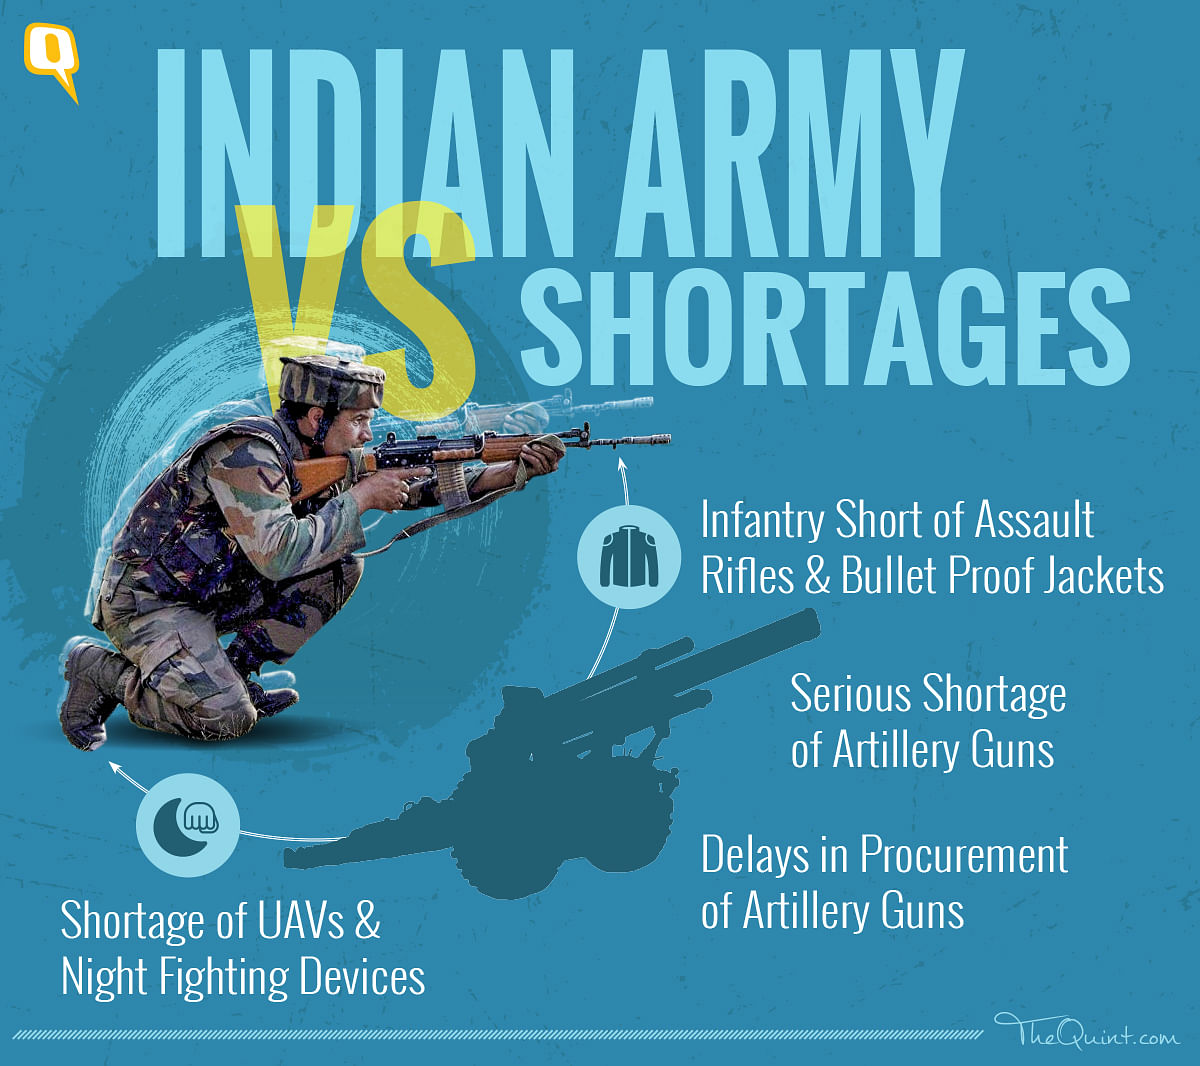 Indian forces, fraught with shortage of arms are ill-prepared to handle a war-like situation, says Surya Gangadharan